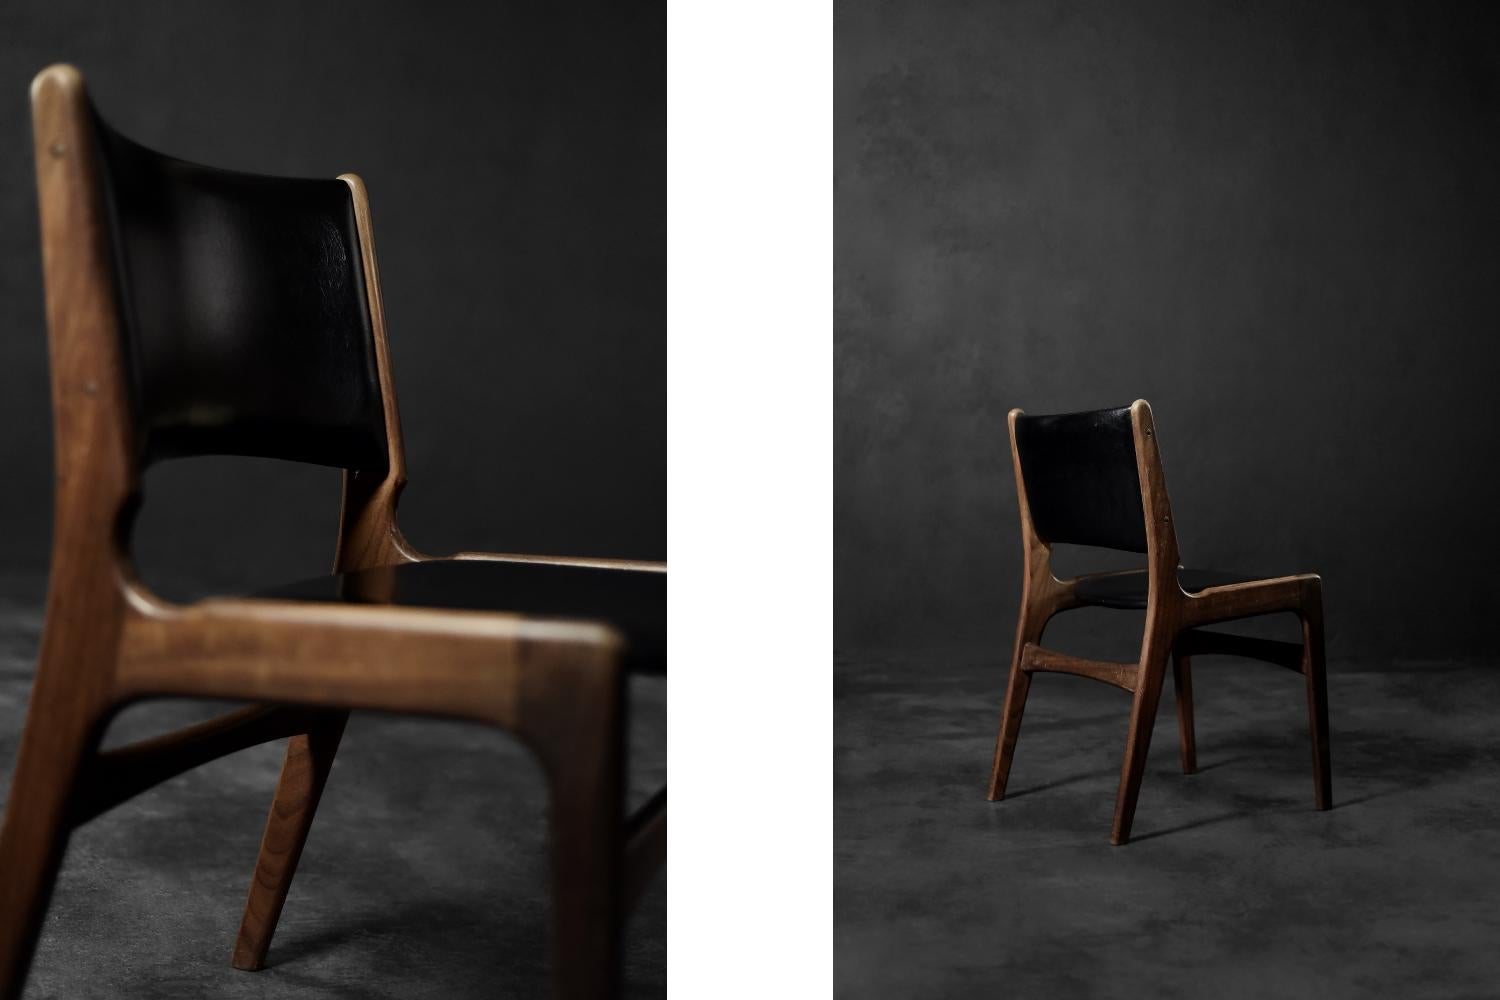 This modernist chair was designed by Erik Buch for the Danish manufacturer Anderstrup Møbelfabrik during the 1950s. It is model 89. Made of high-quality teak wood in a dark shade of brown. The contoured, comfortable seat and backrest are upholstered